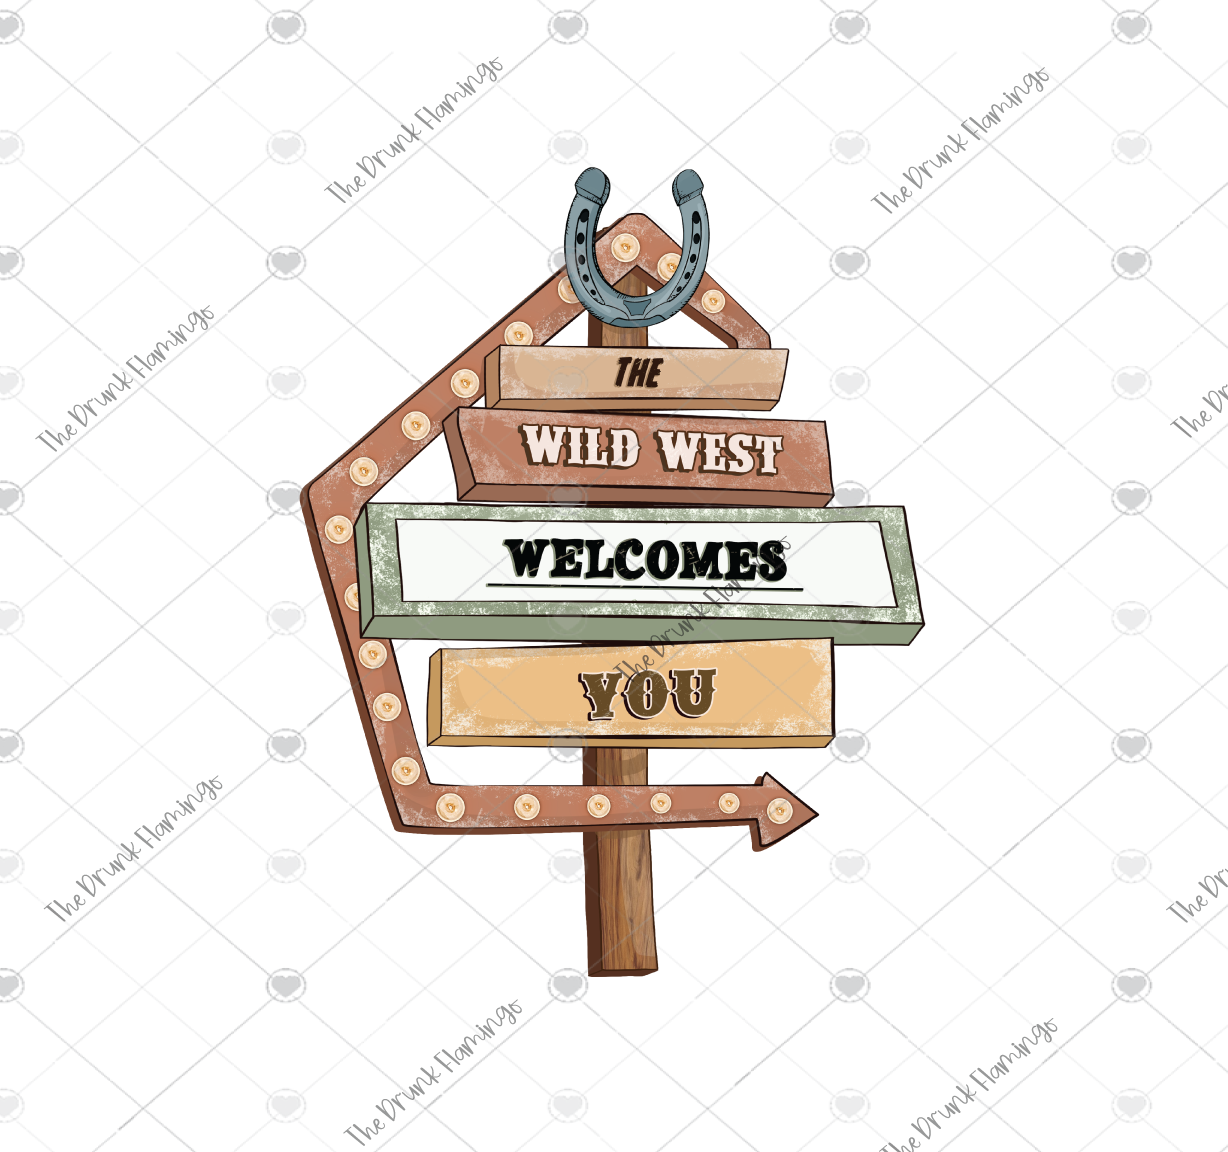 59- The Wild West Welcomes You WHITE backed decal